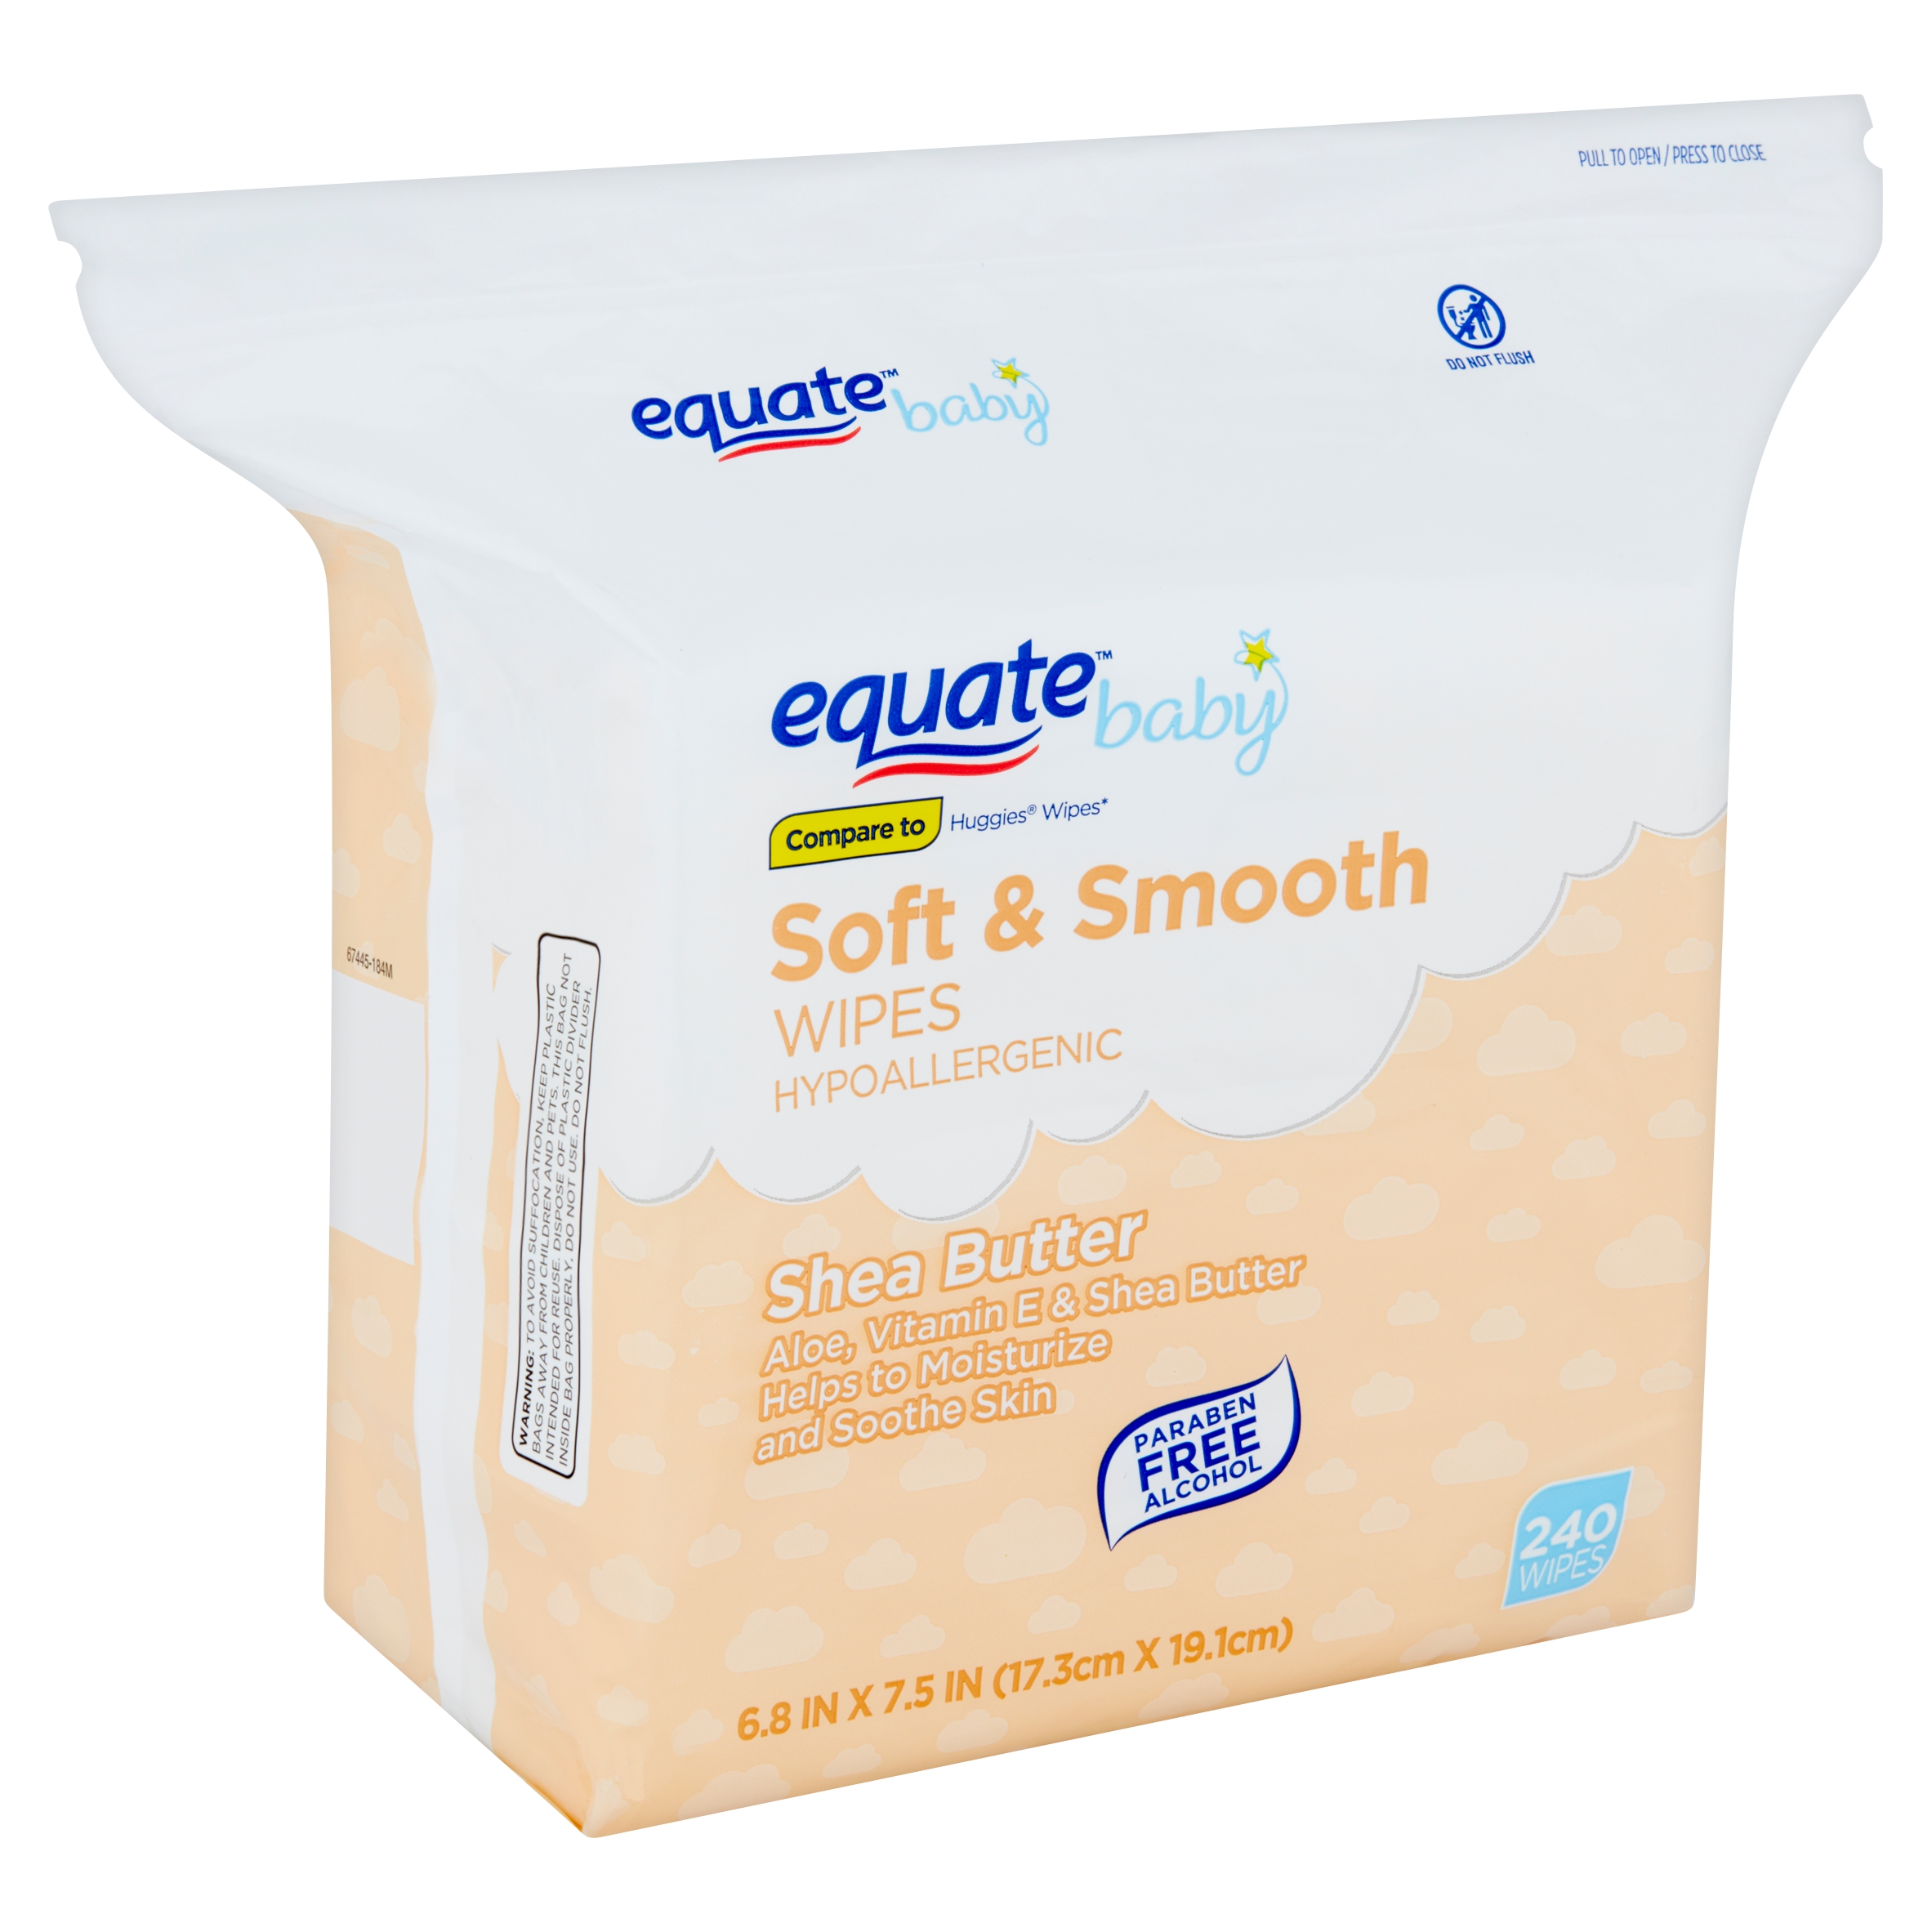 Equate Baby Soft & Smooth Shea Butter Wipes, 240 Count - image 1 of 10